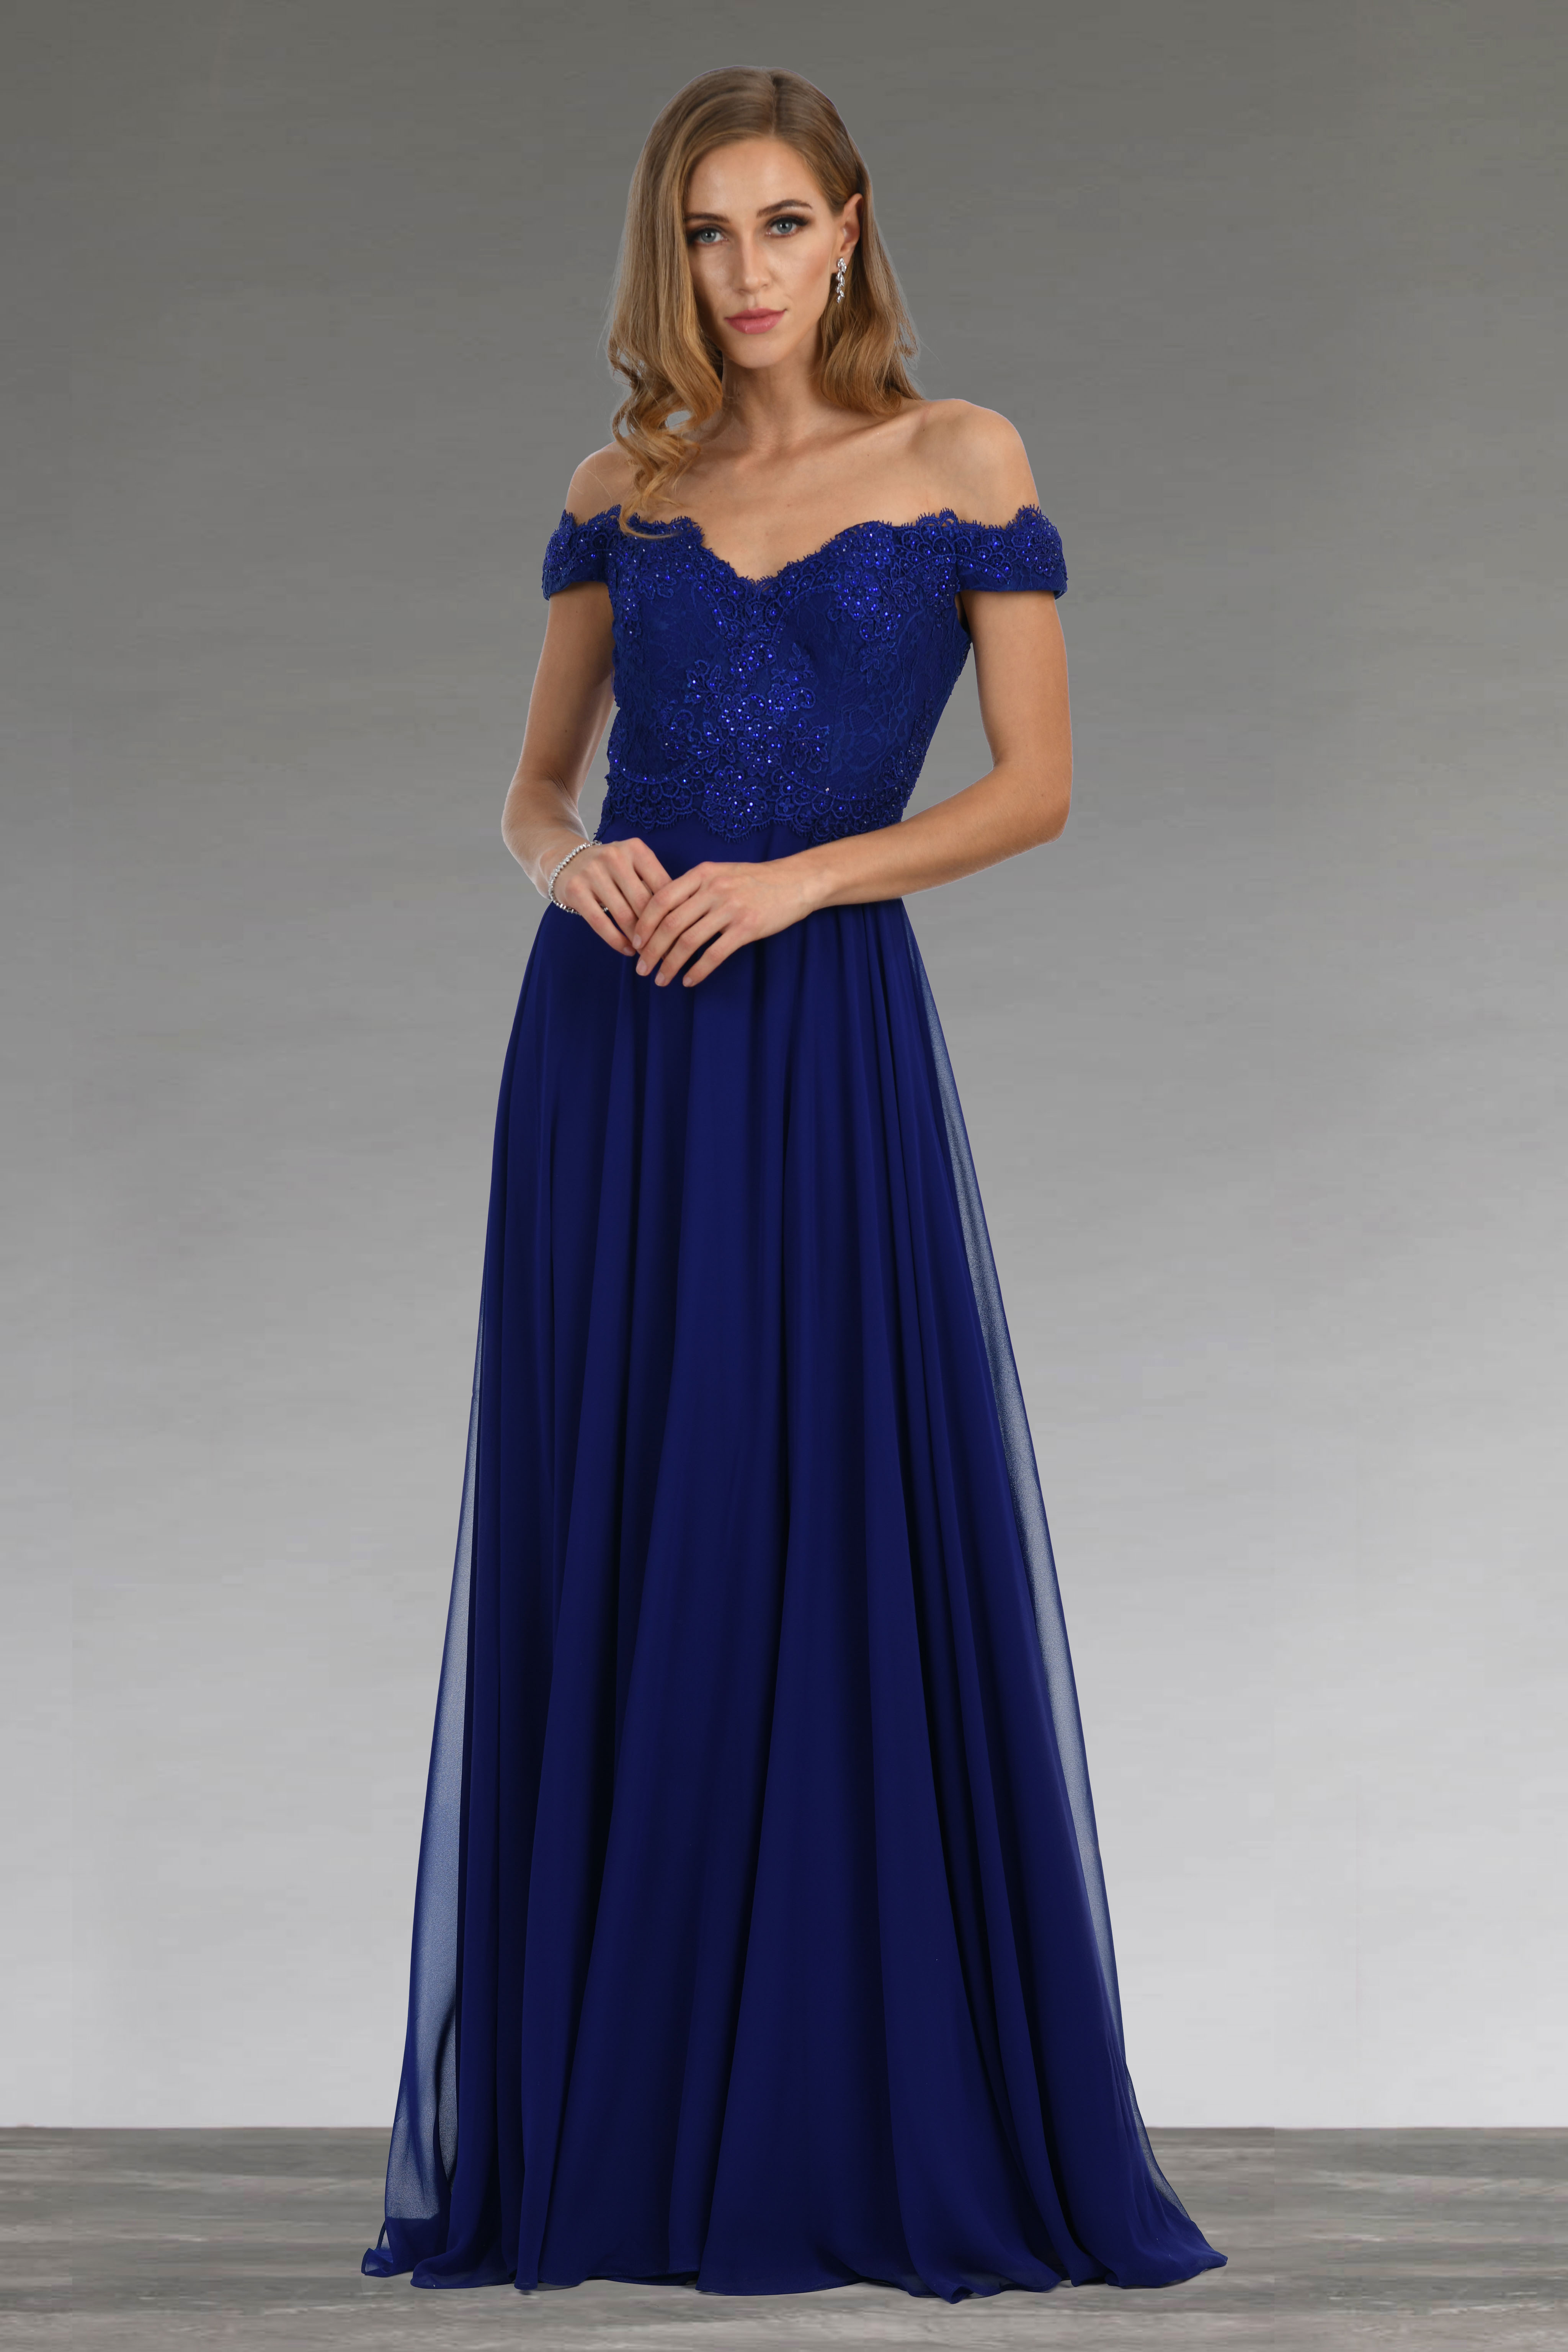 Full length dress with chiffon style skirt. AF81673 - Catherines of Partick